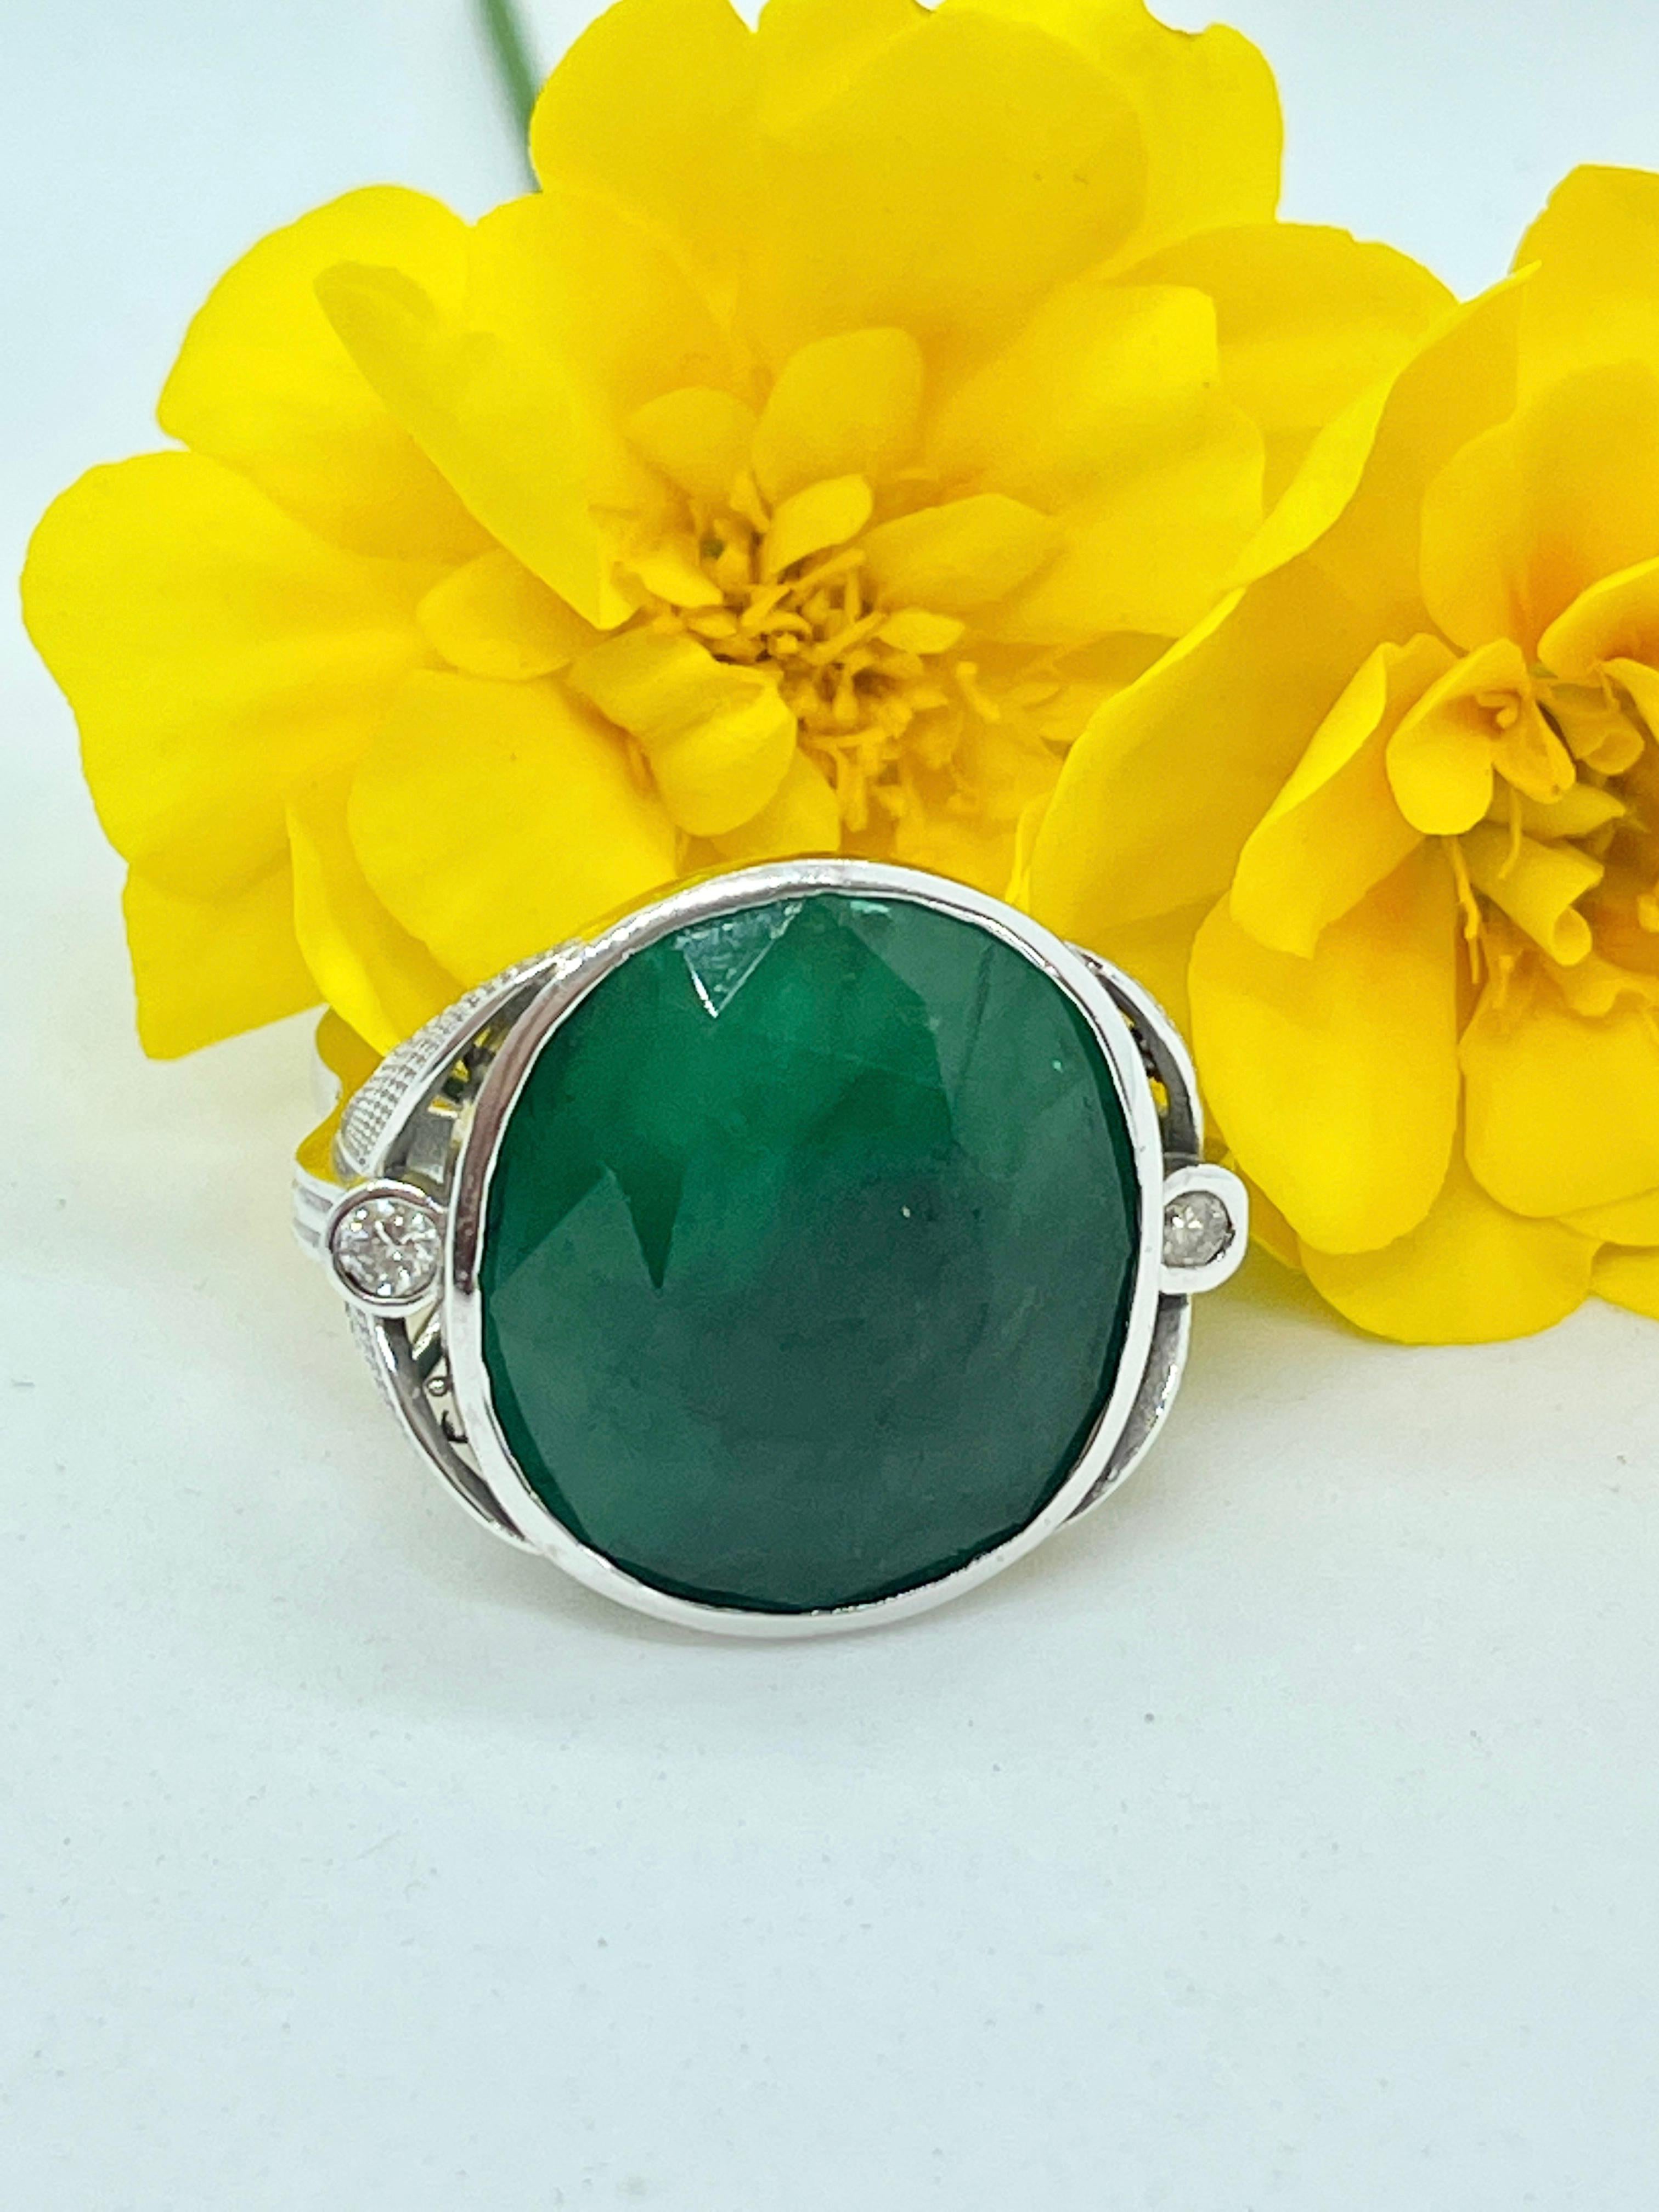 Modern Amazing Huge 20CT Natural Emerald Diamond Ring 9ct White Gold with Valuation For Sale